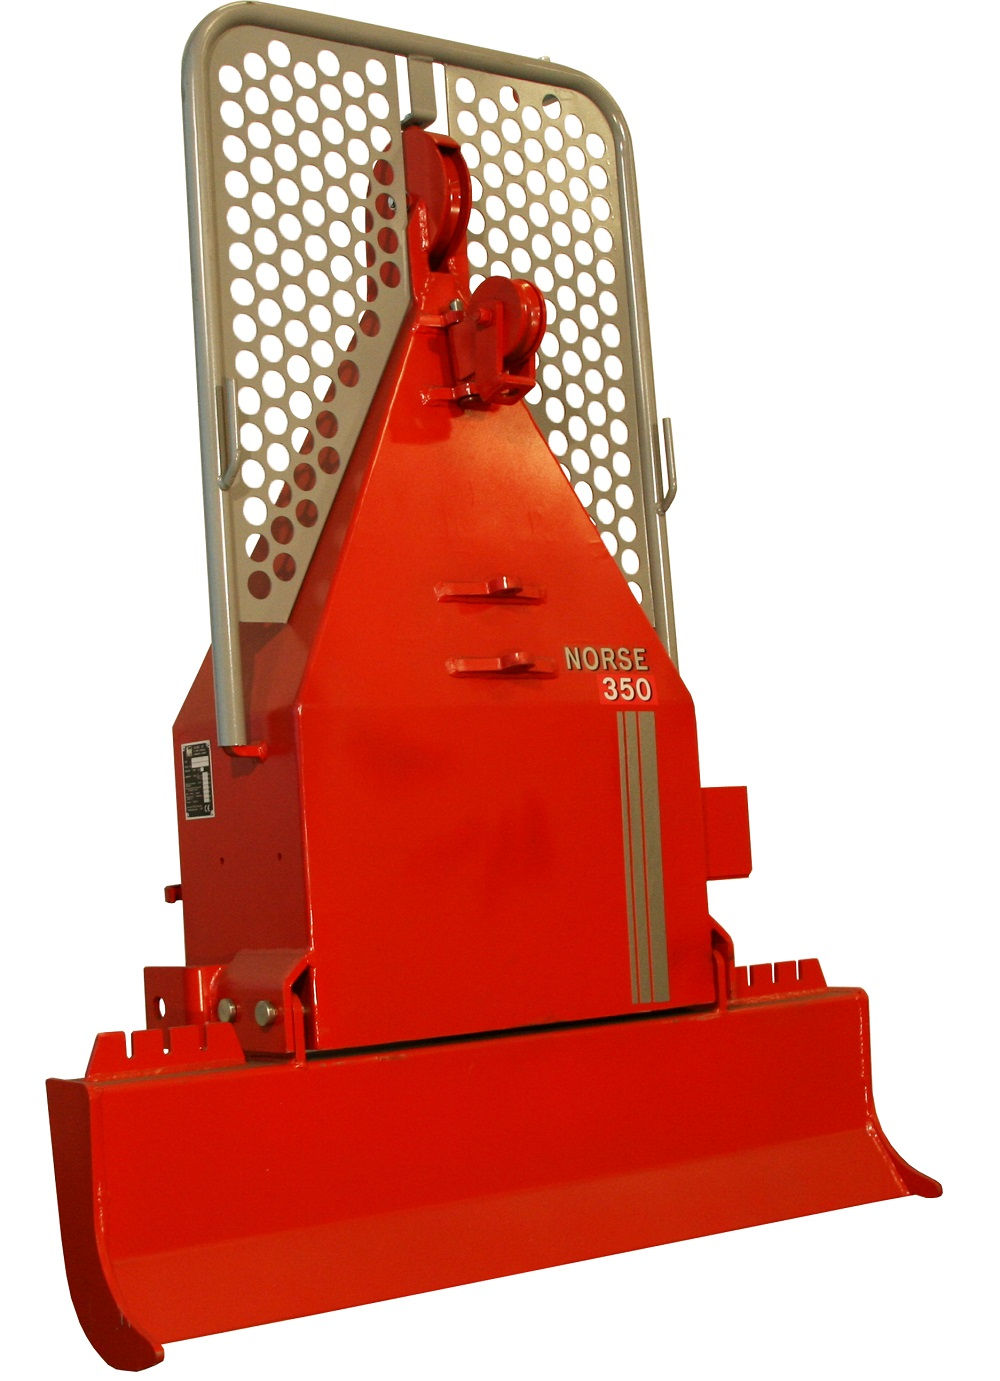 Norse logging winch on a white background